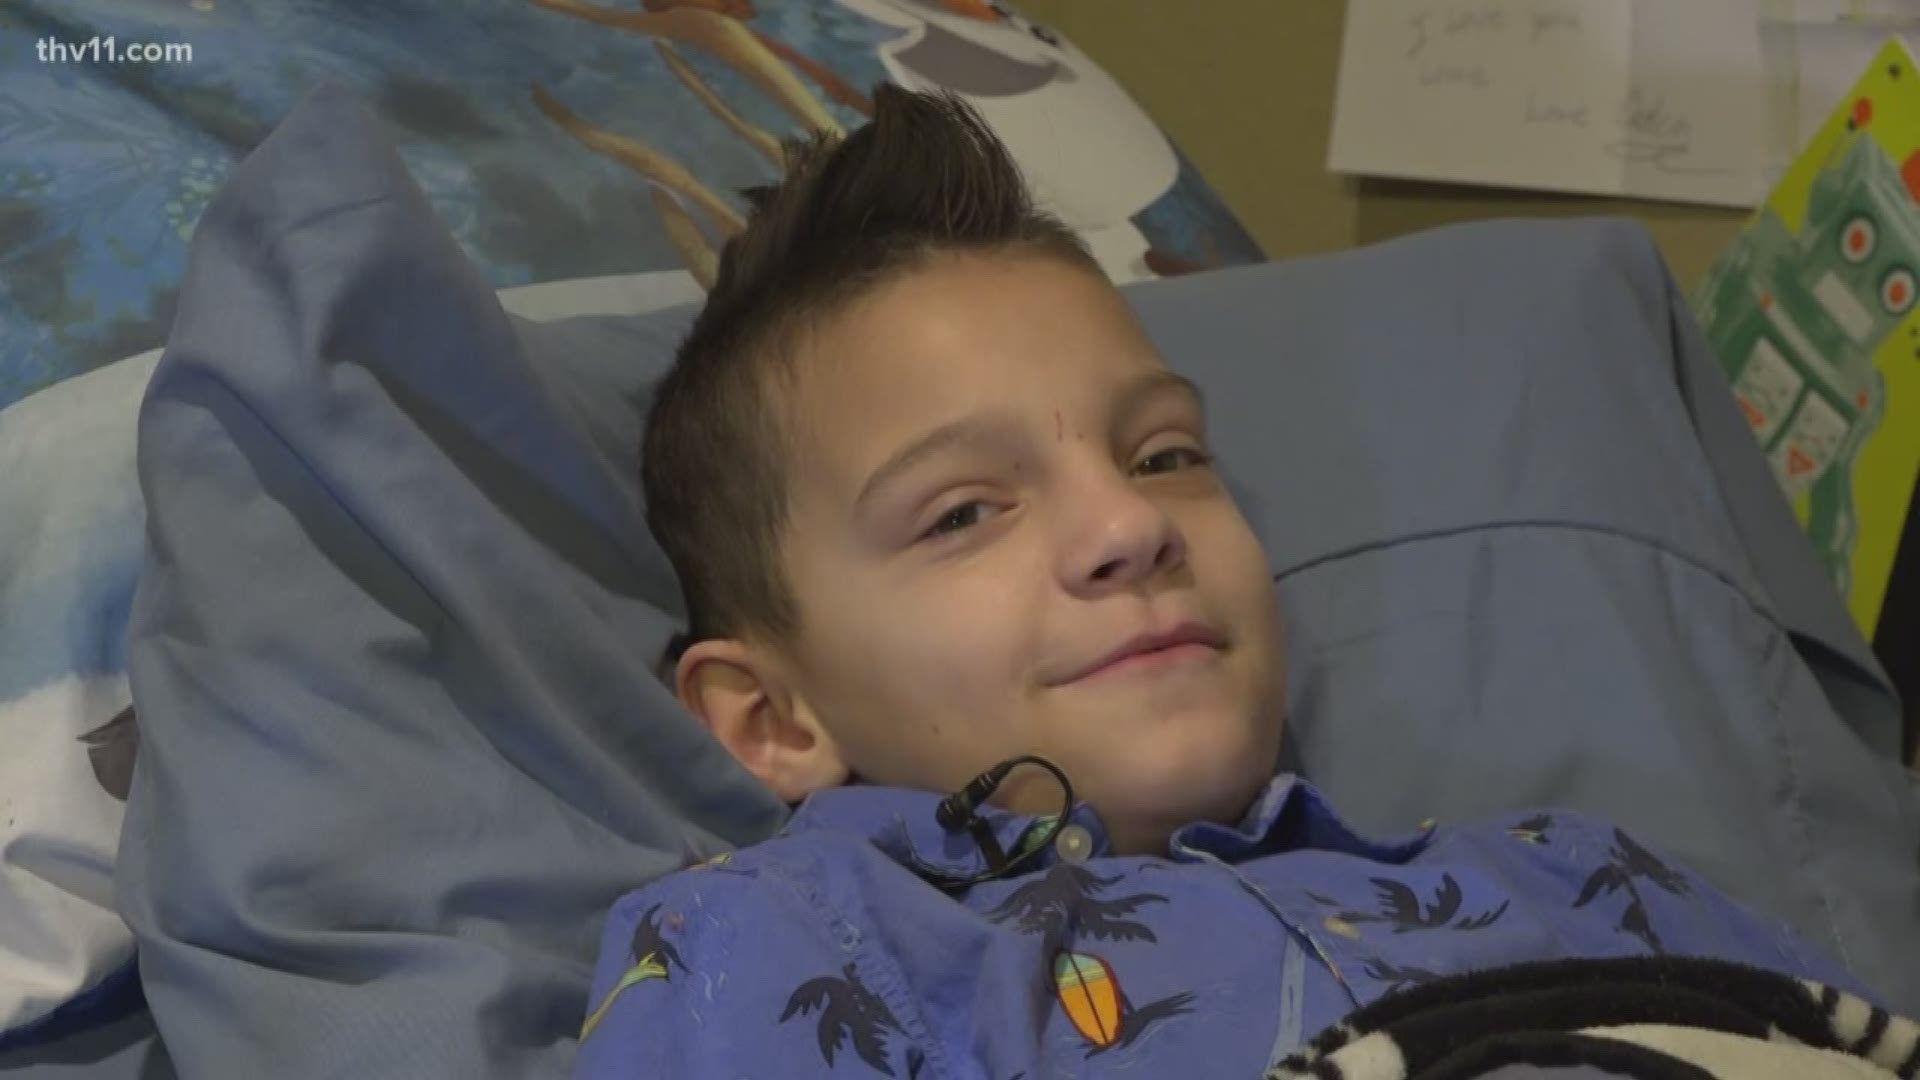 Hundreds and hundreds of people all across the country have rallied behind an Arkansas boy who has one simple request.